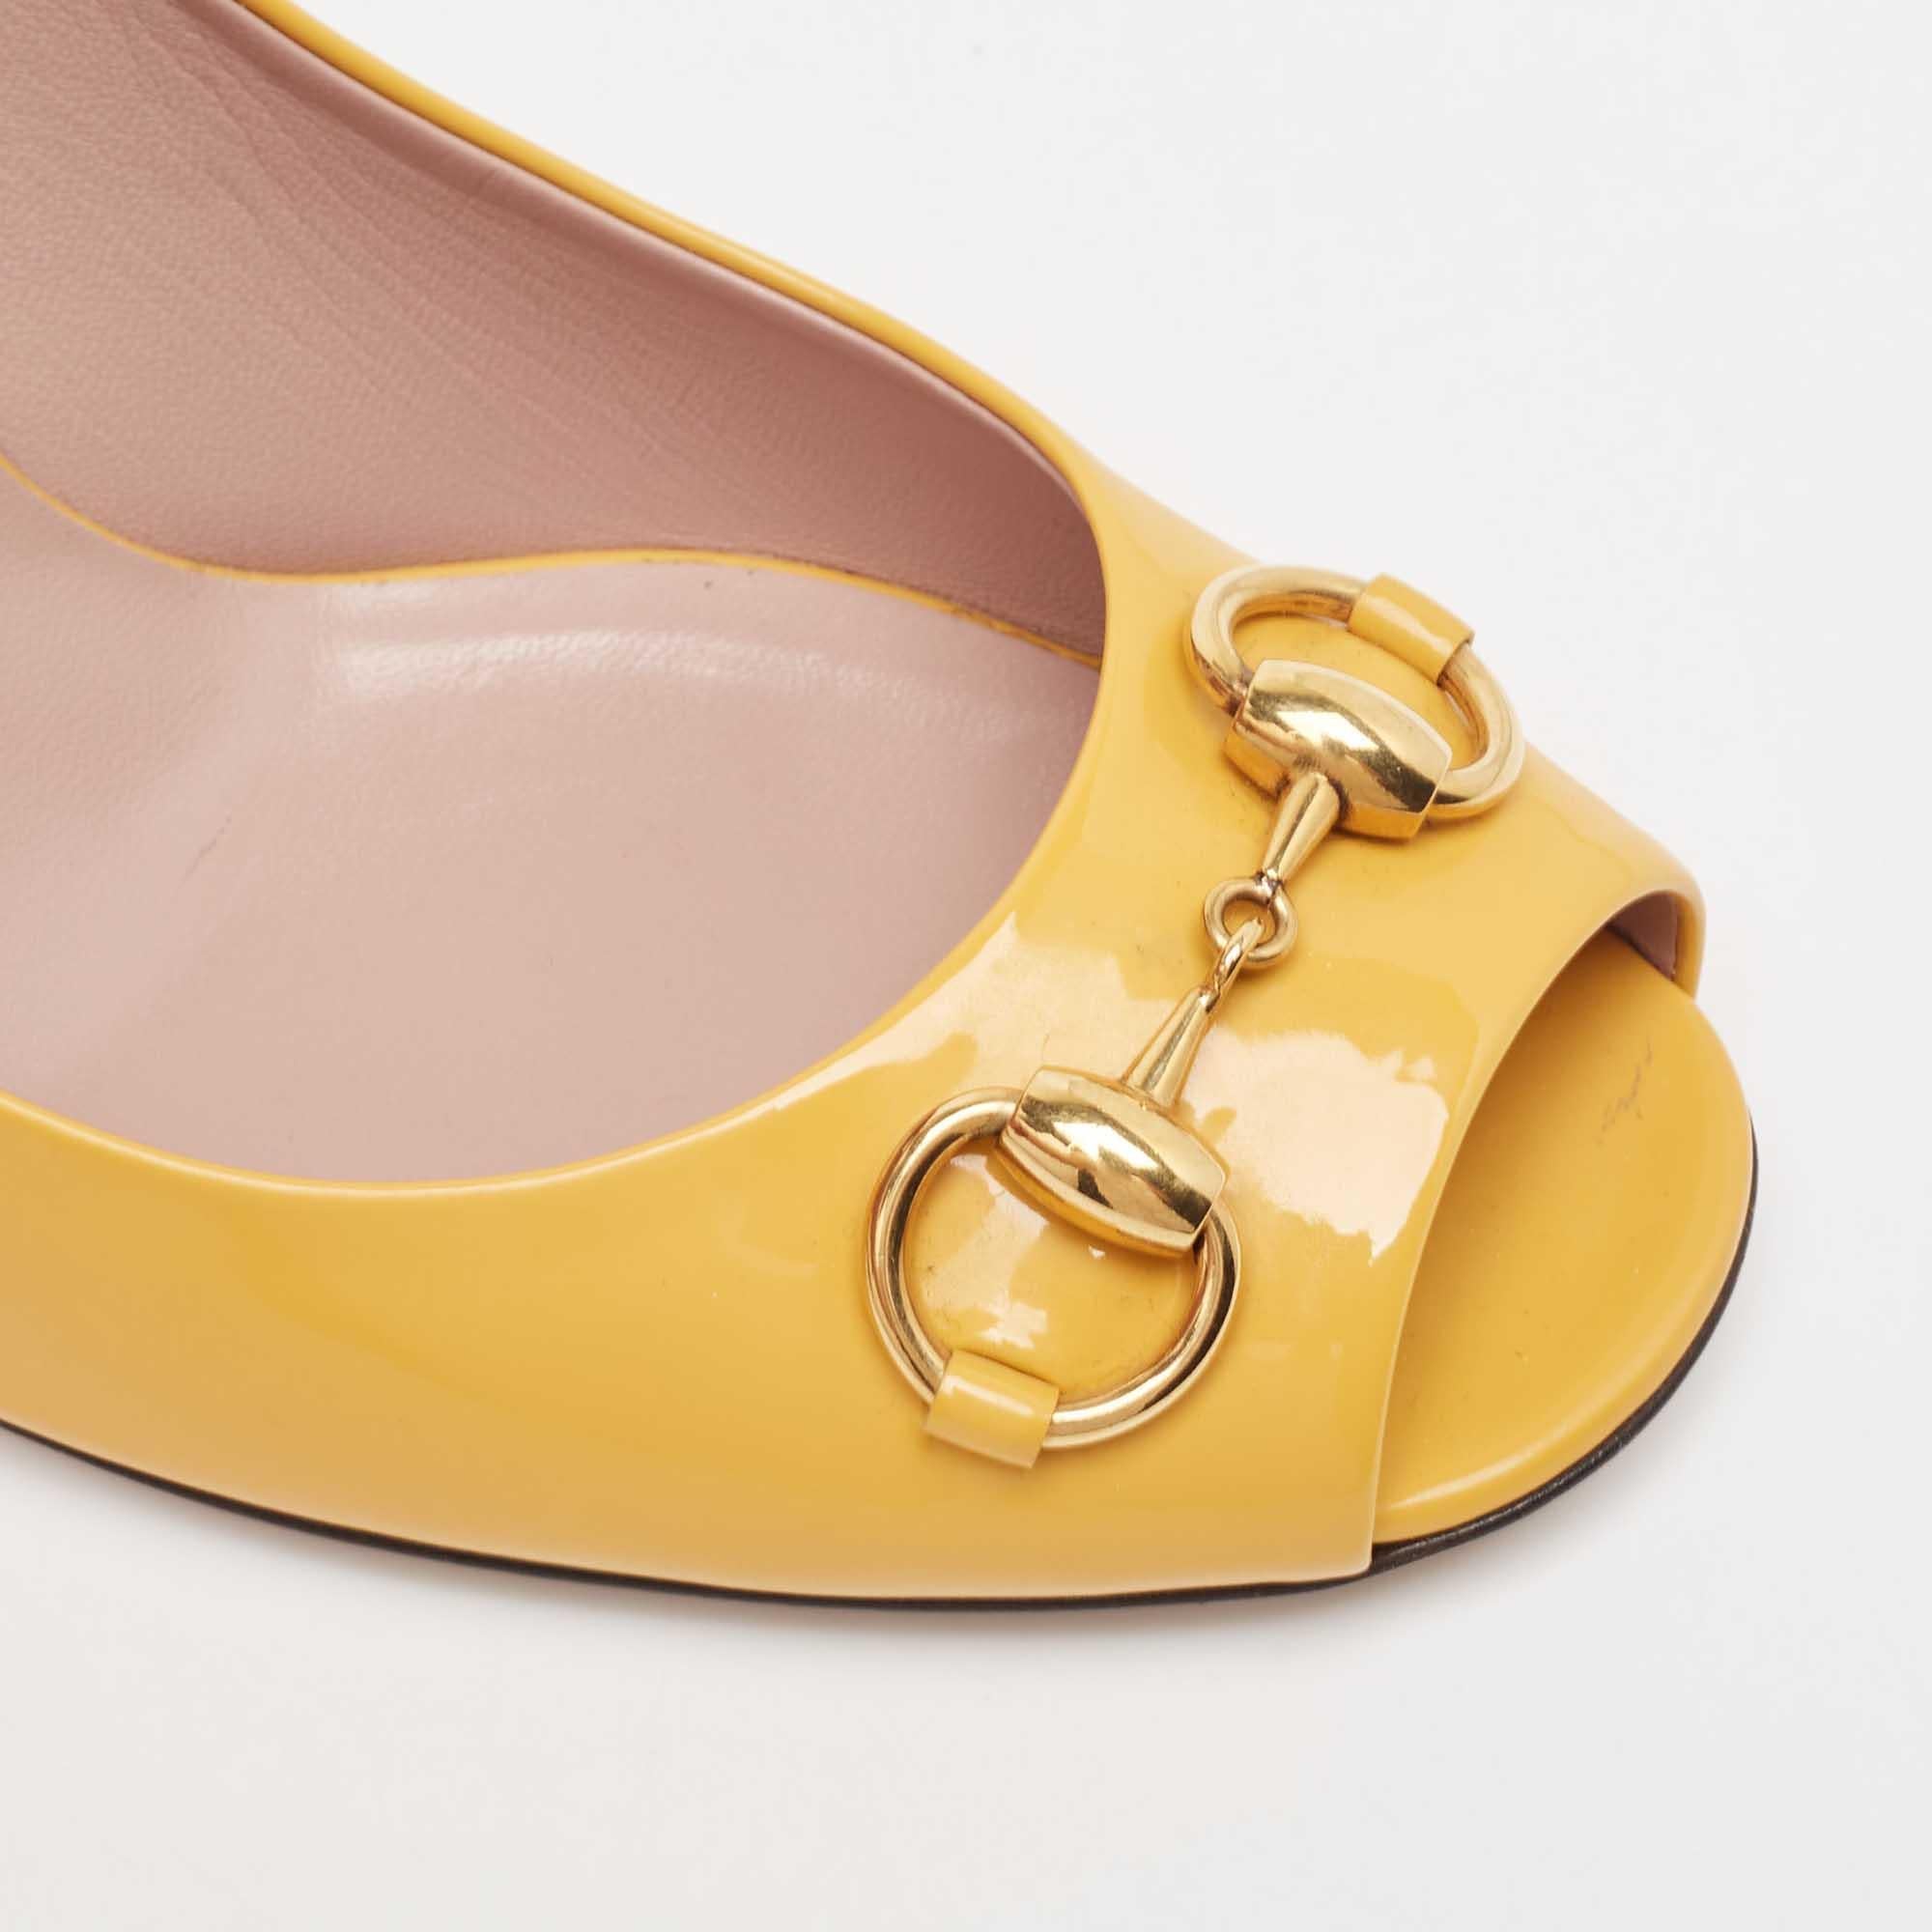 Gucci Yellow Patent Leather Horsebit Peep Toe Pumps Size 38 For Sale 2